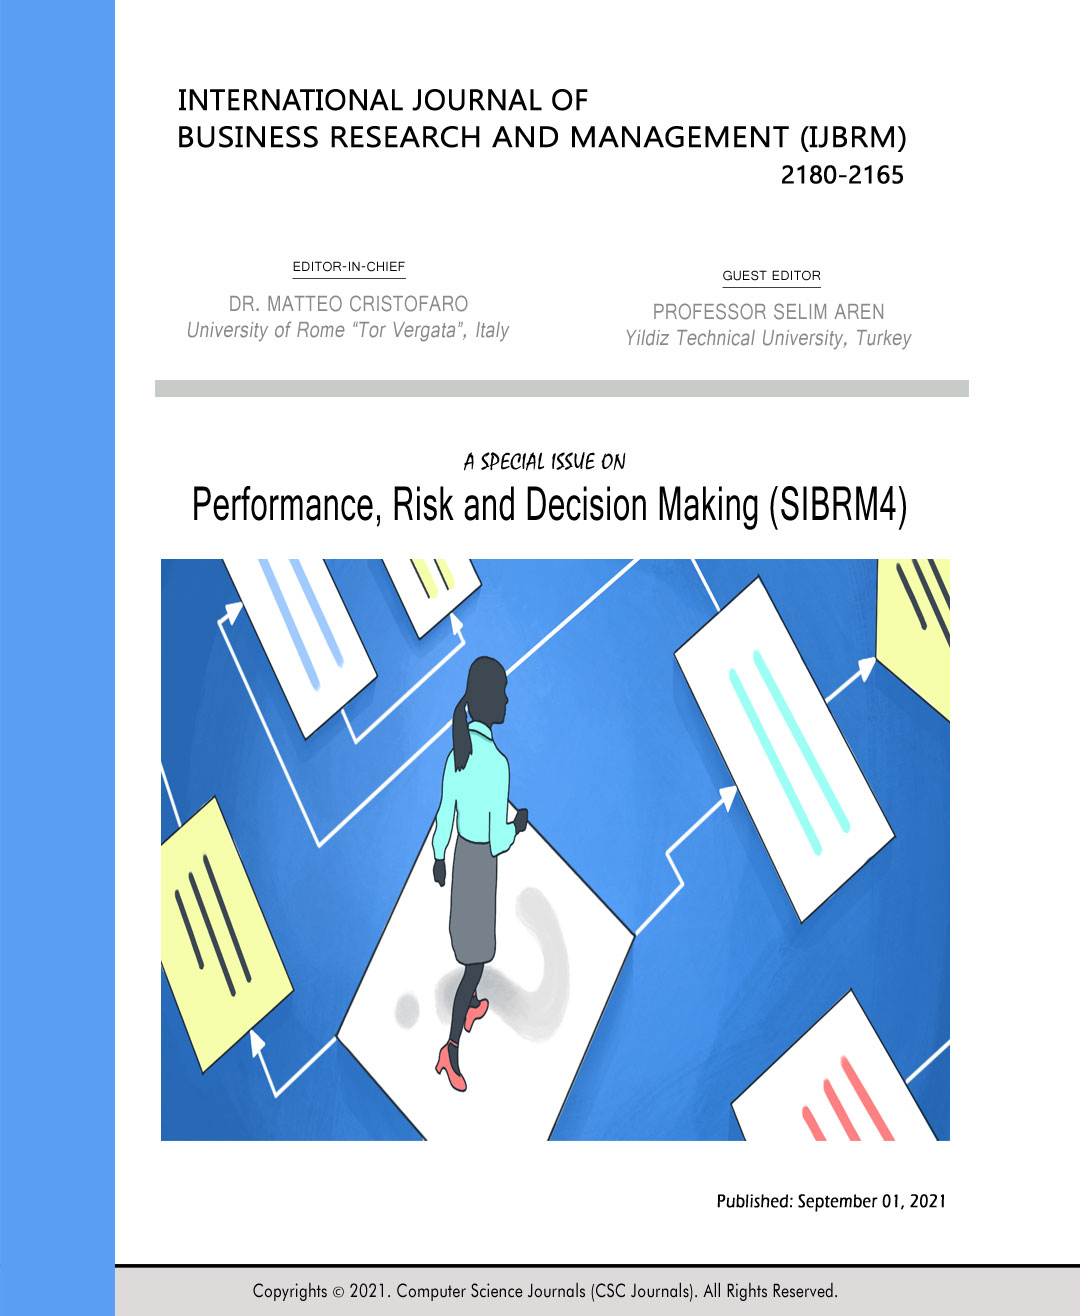 Performance, Risk and Decision Making (SIBRM4)